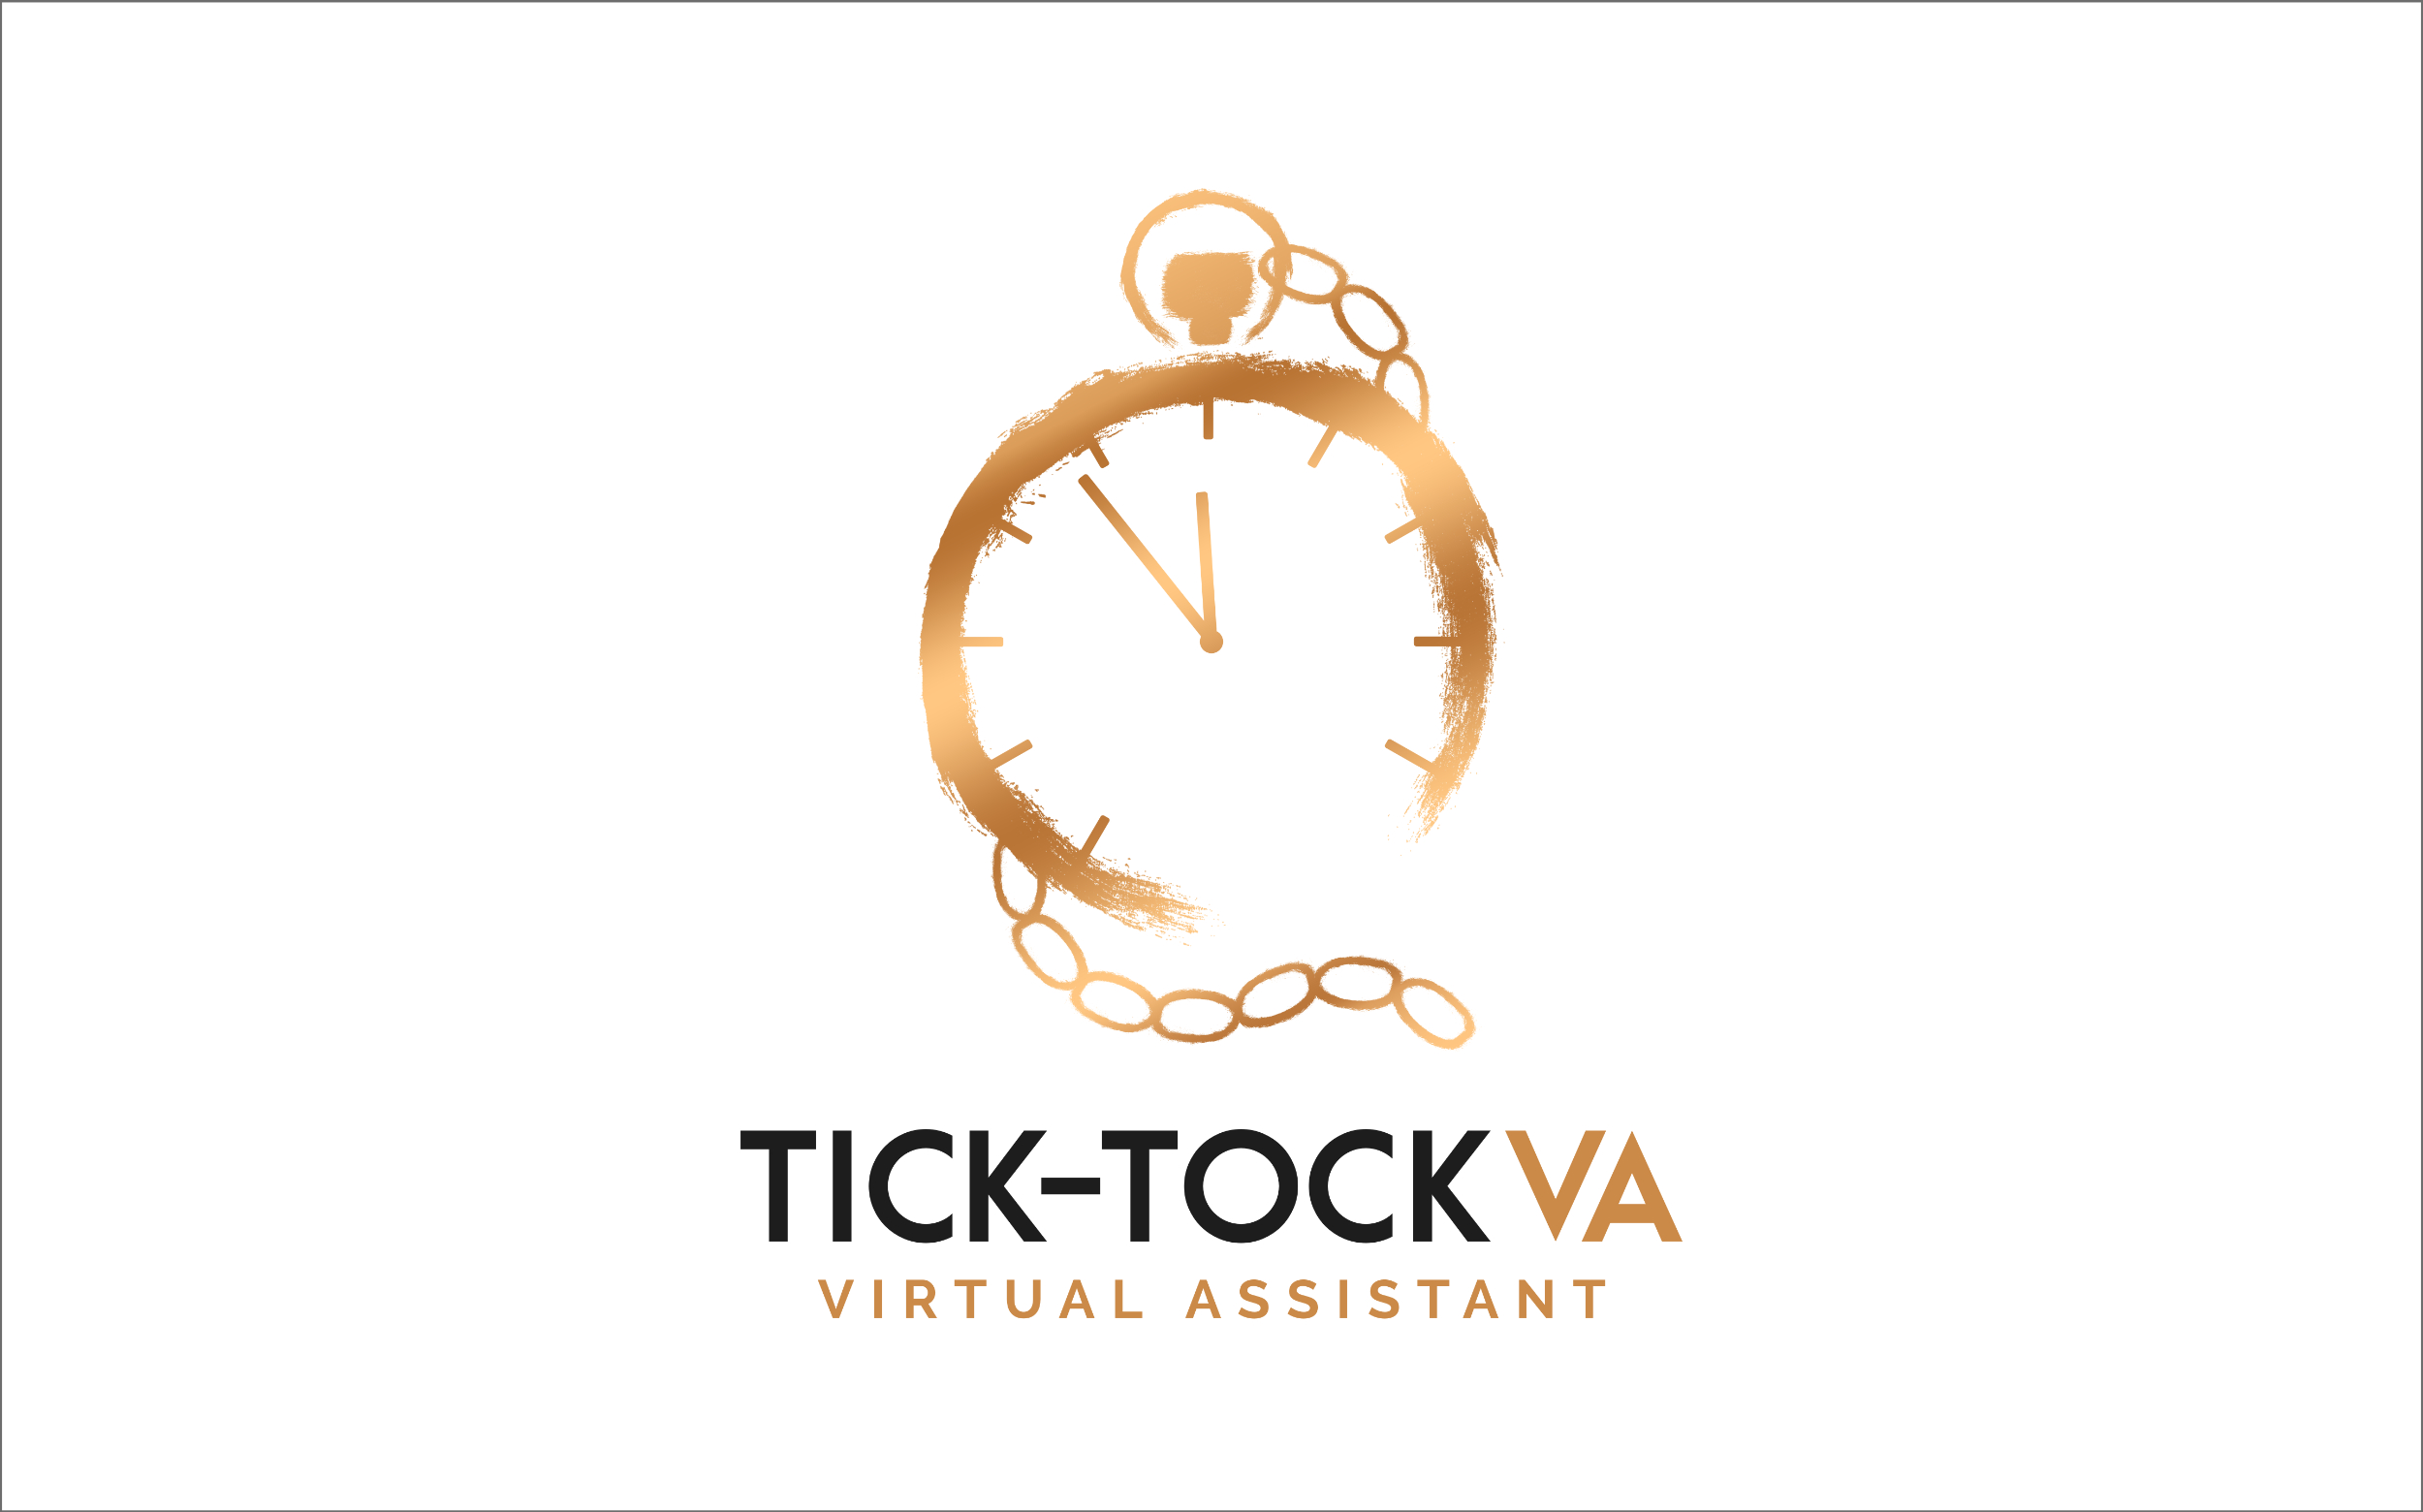 Logo Design for Tick Tock Virtual Assistant.  Made by Jon Glanville - Plymouth Graphic Designer.